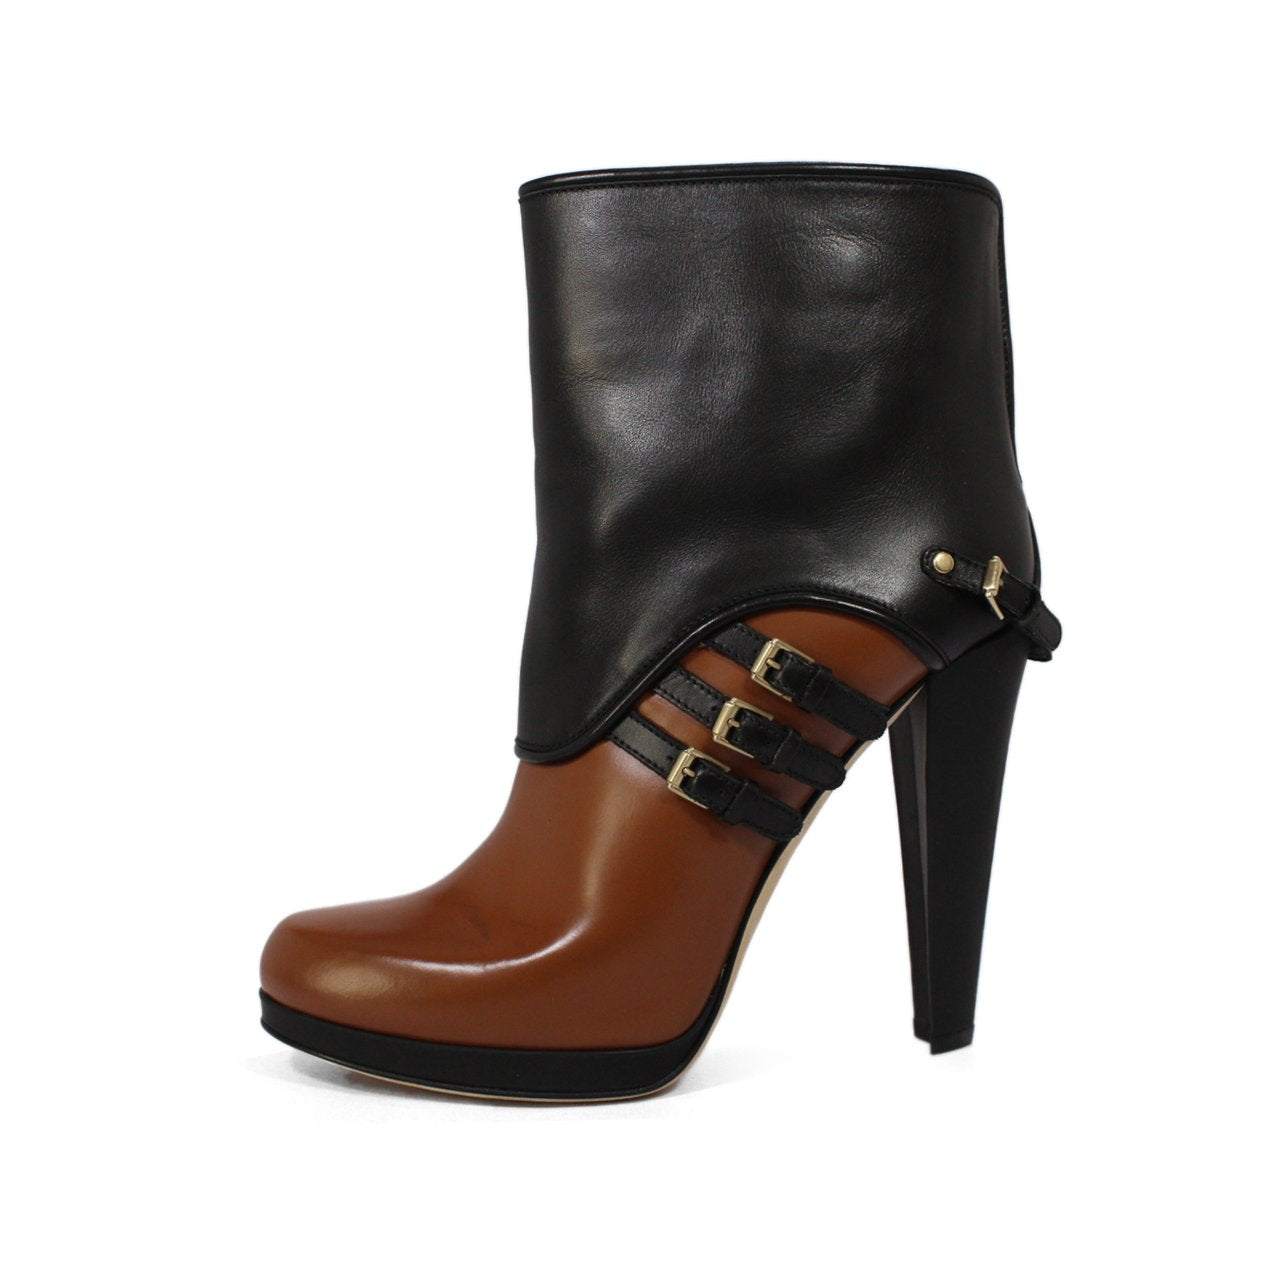 Bally Dienne Dual Color Buckle Strap Ankle Booties